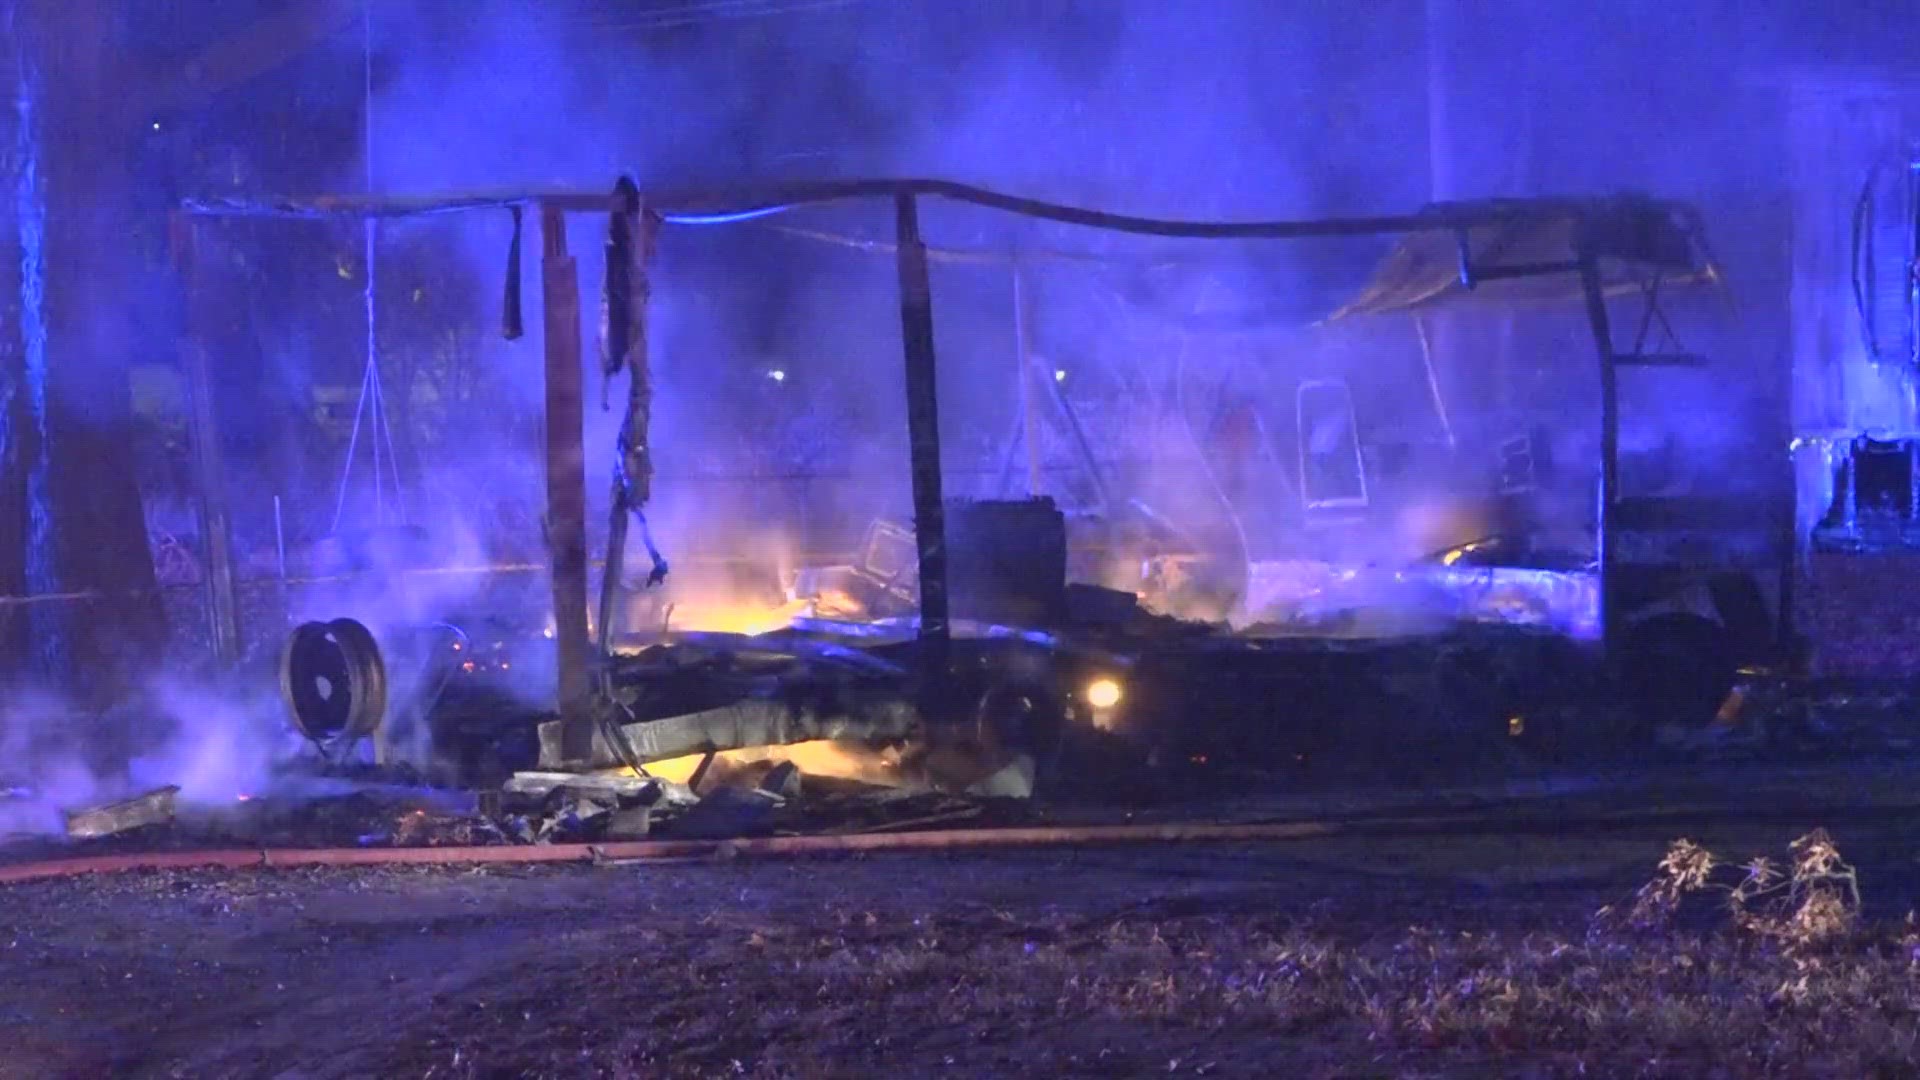 A fire broke out shortly after 1:30 a.m. Monday at a mobile home in Cahokia Heights. The damage was extensive, but three adults and two dogs were able to escape.